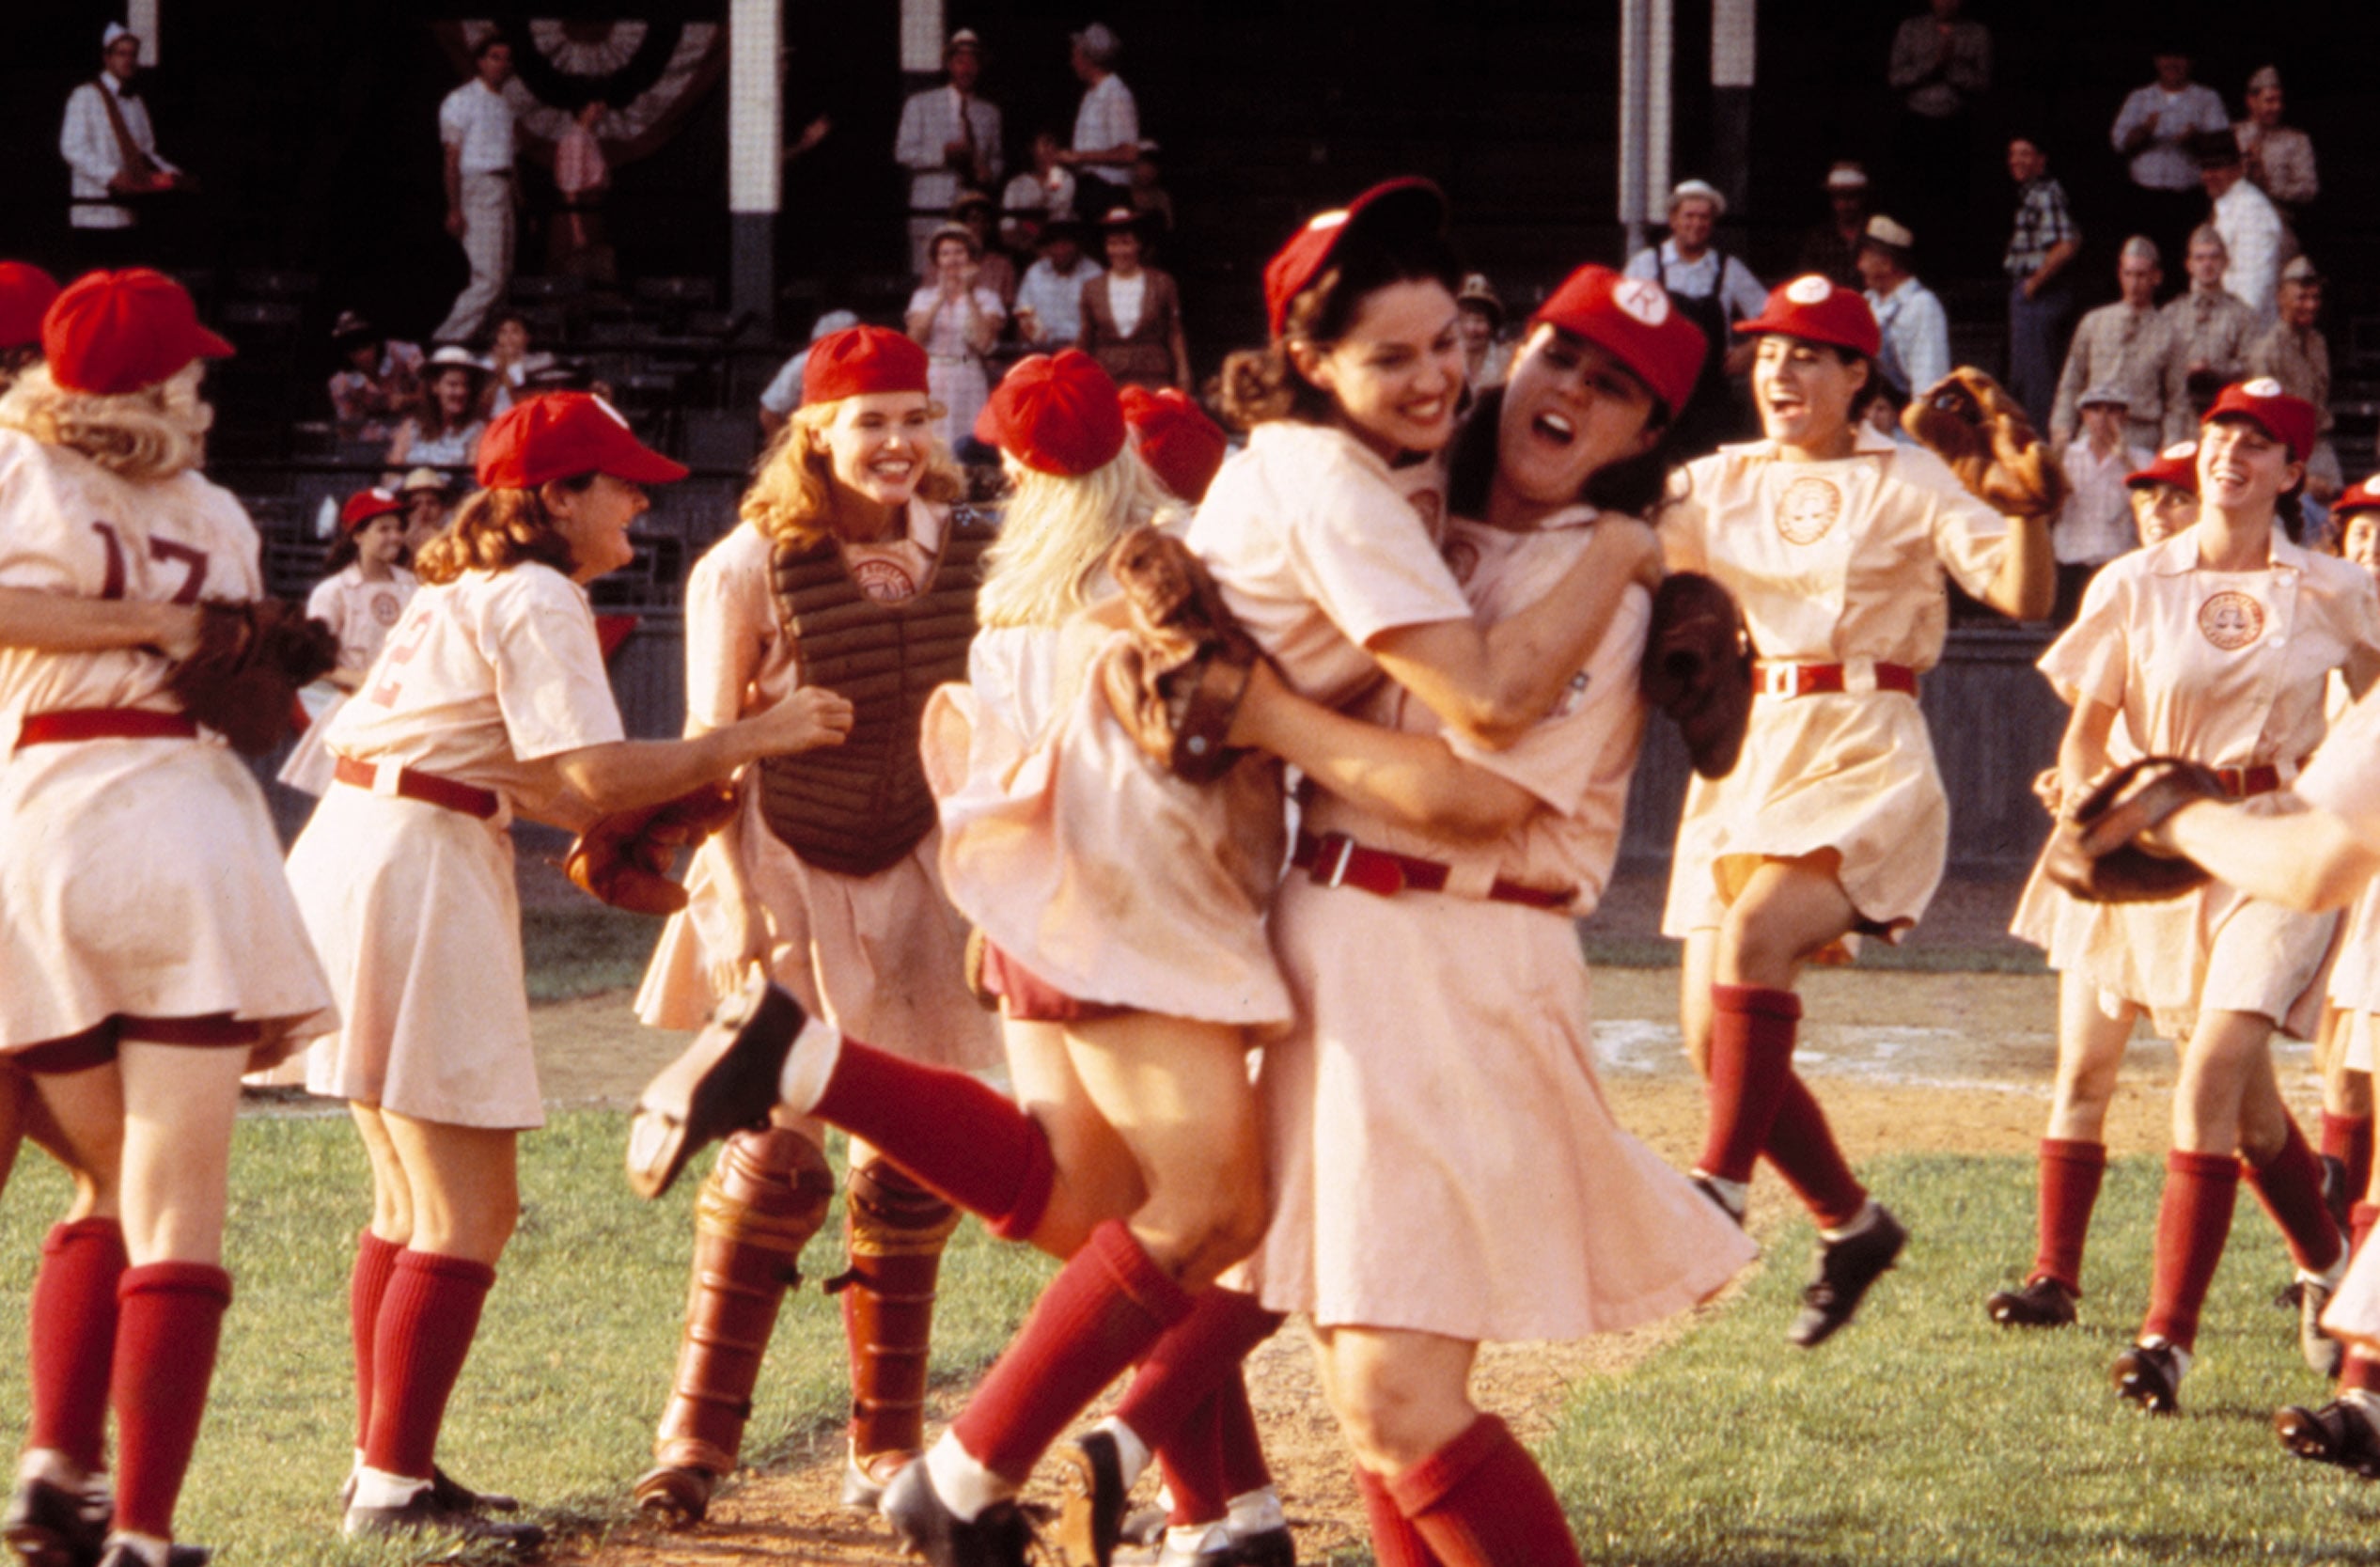 A League of Their Own' Cast: Where Are They Now?